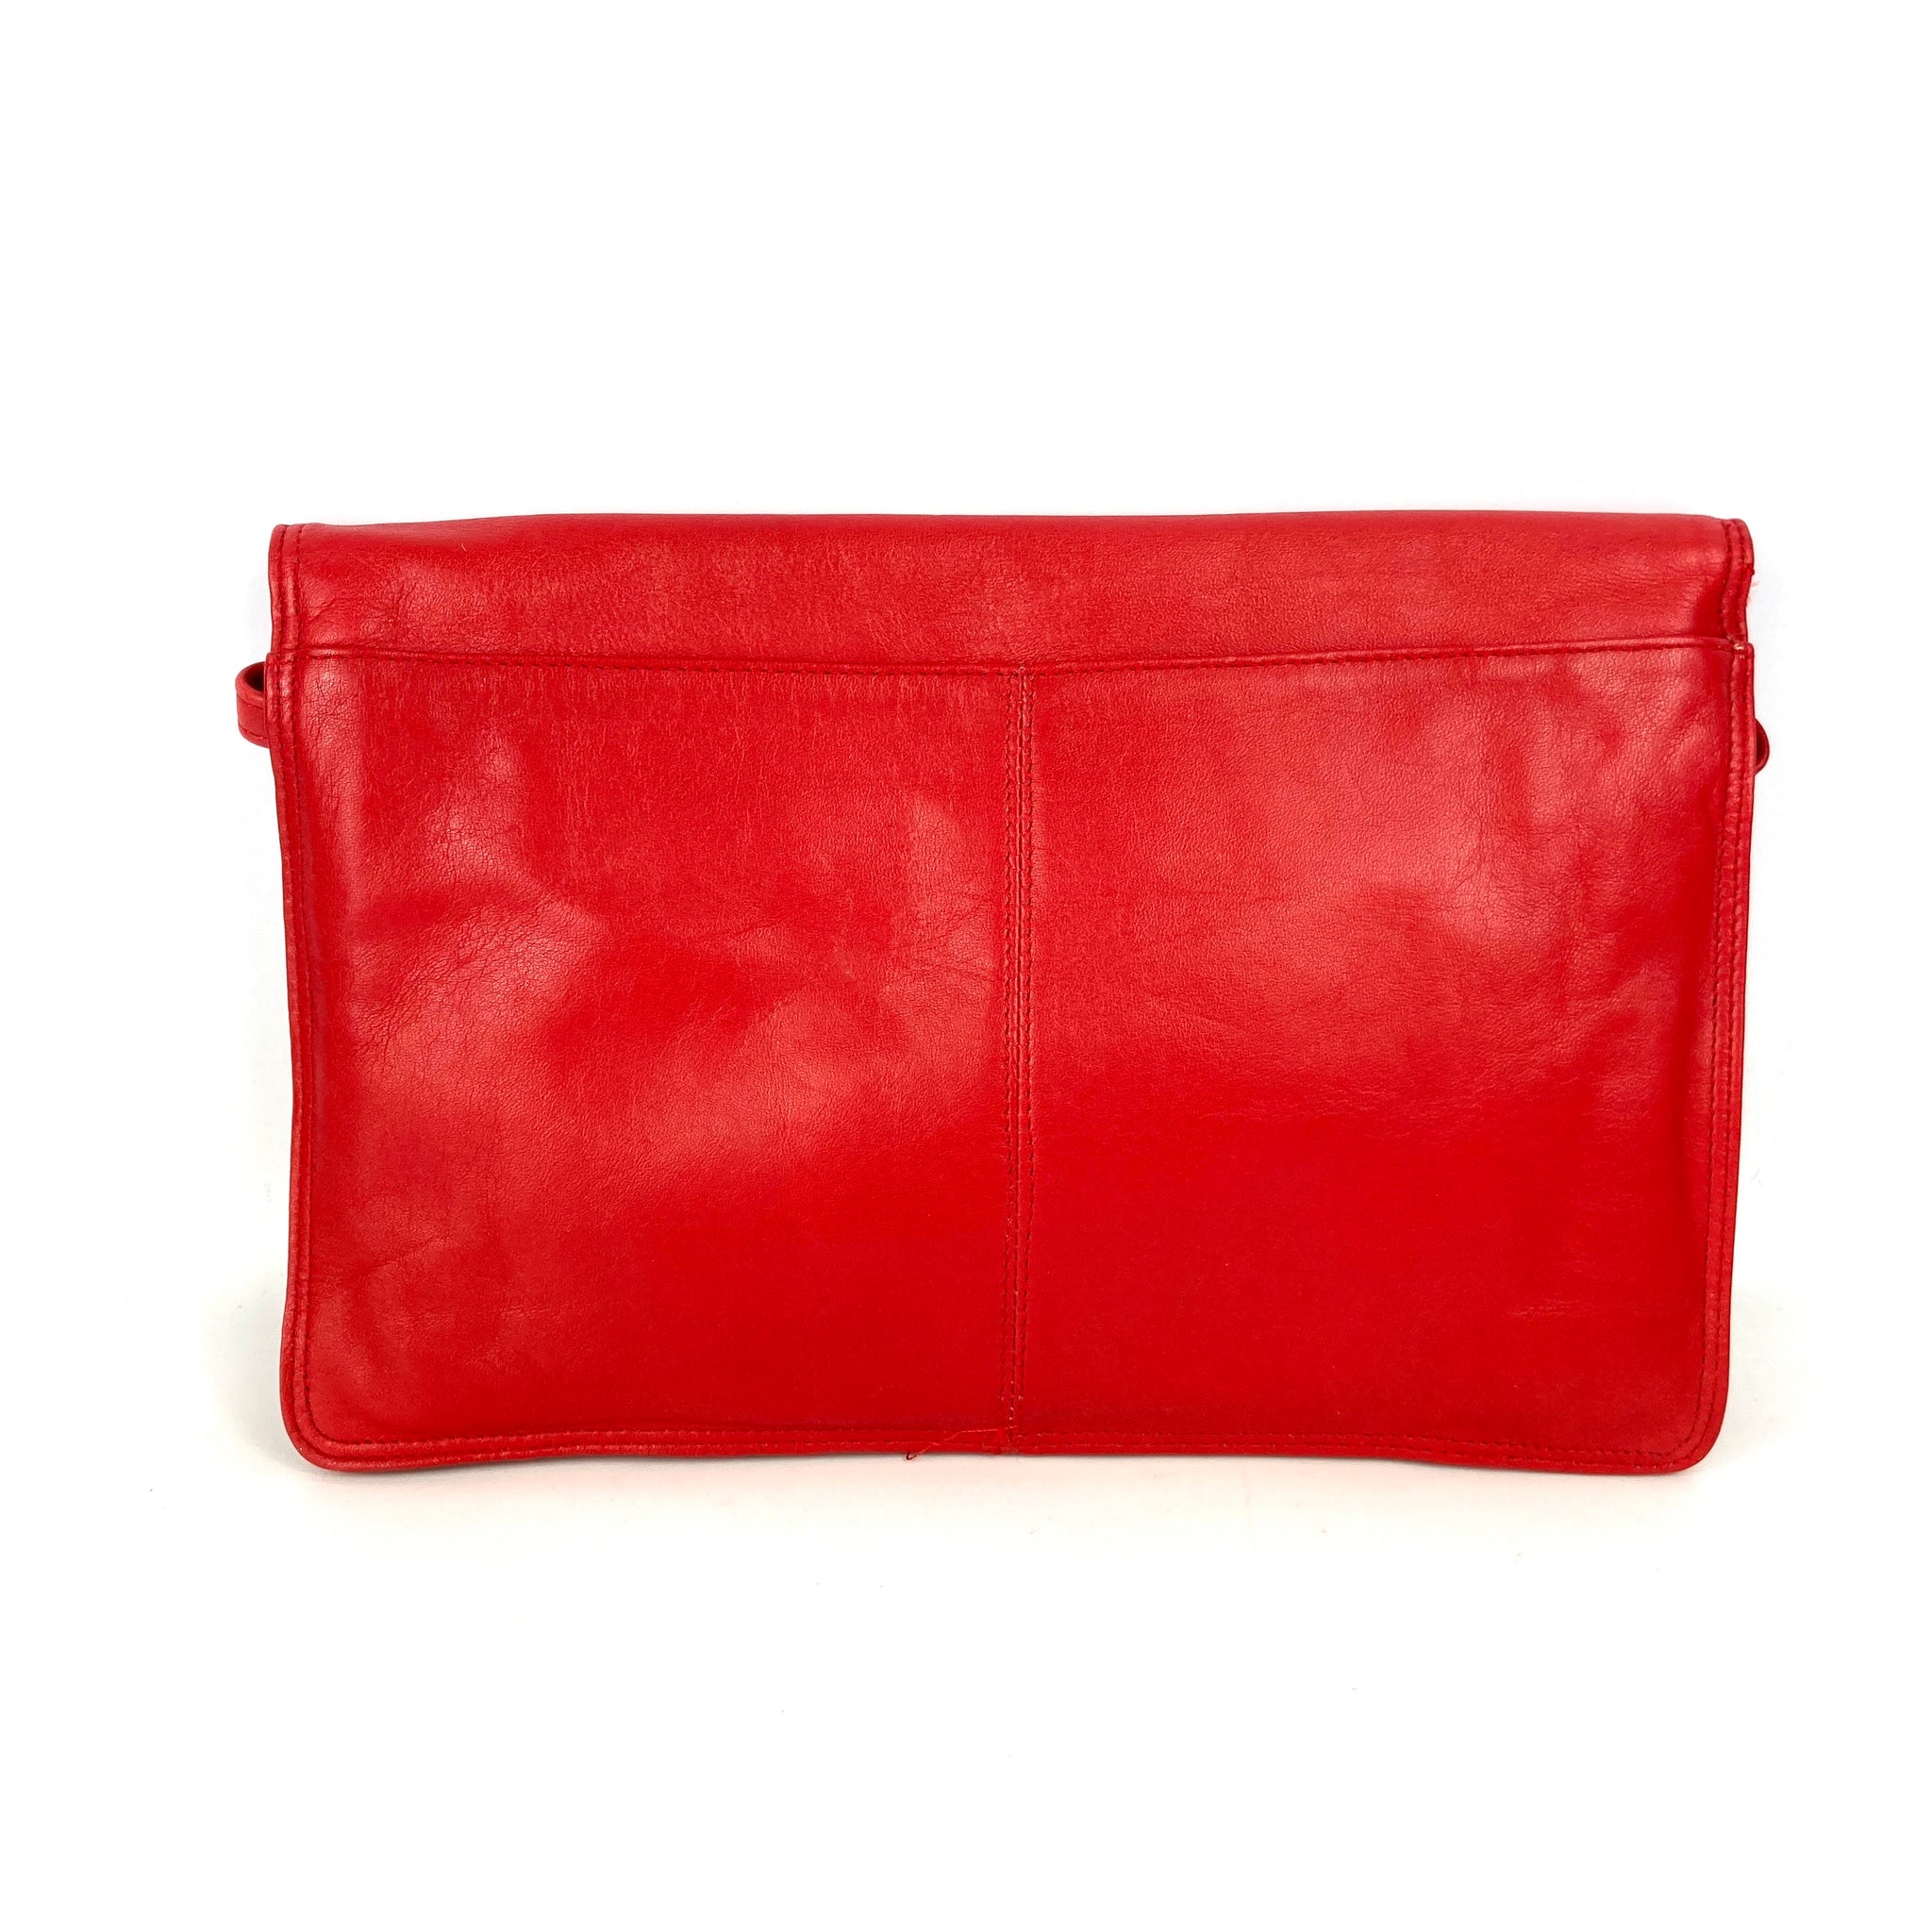 Suzy Levian Small Faux Leather Quilted Clutch Handbag, Red – SUZY LEVIAN  NEW YORK